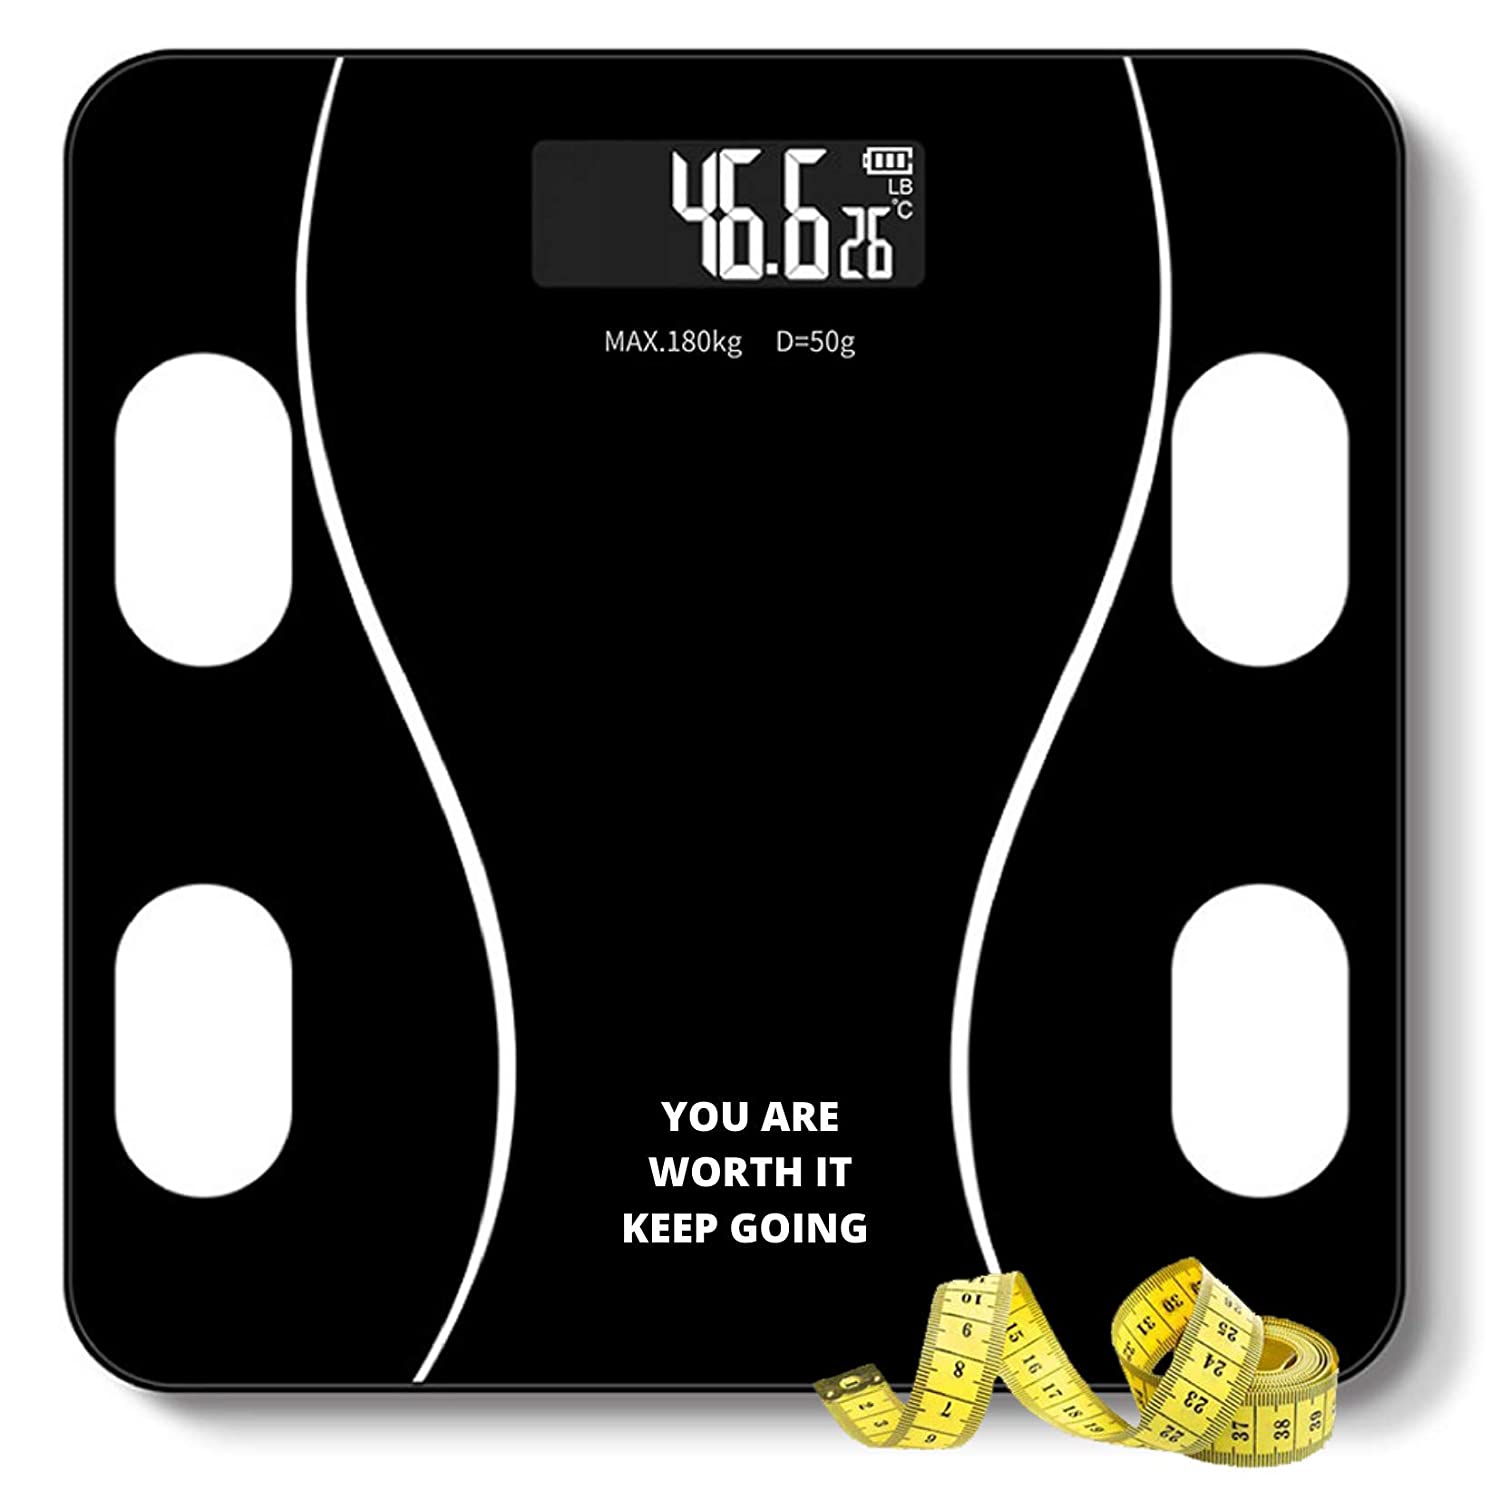 QUARK MART- India Heavy Thick Tempered Glass Lcd Display Weighing Machine